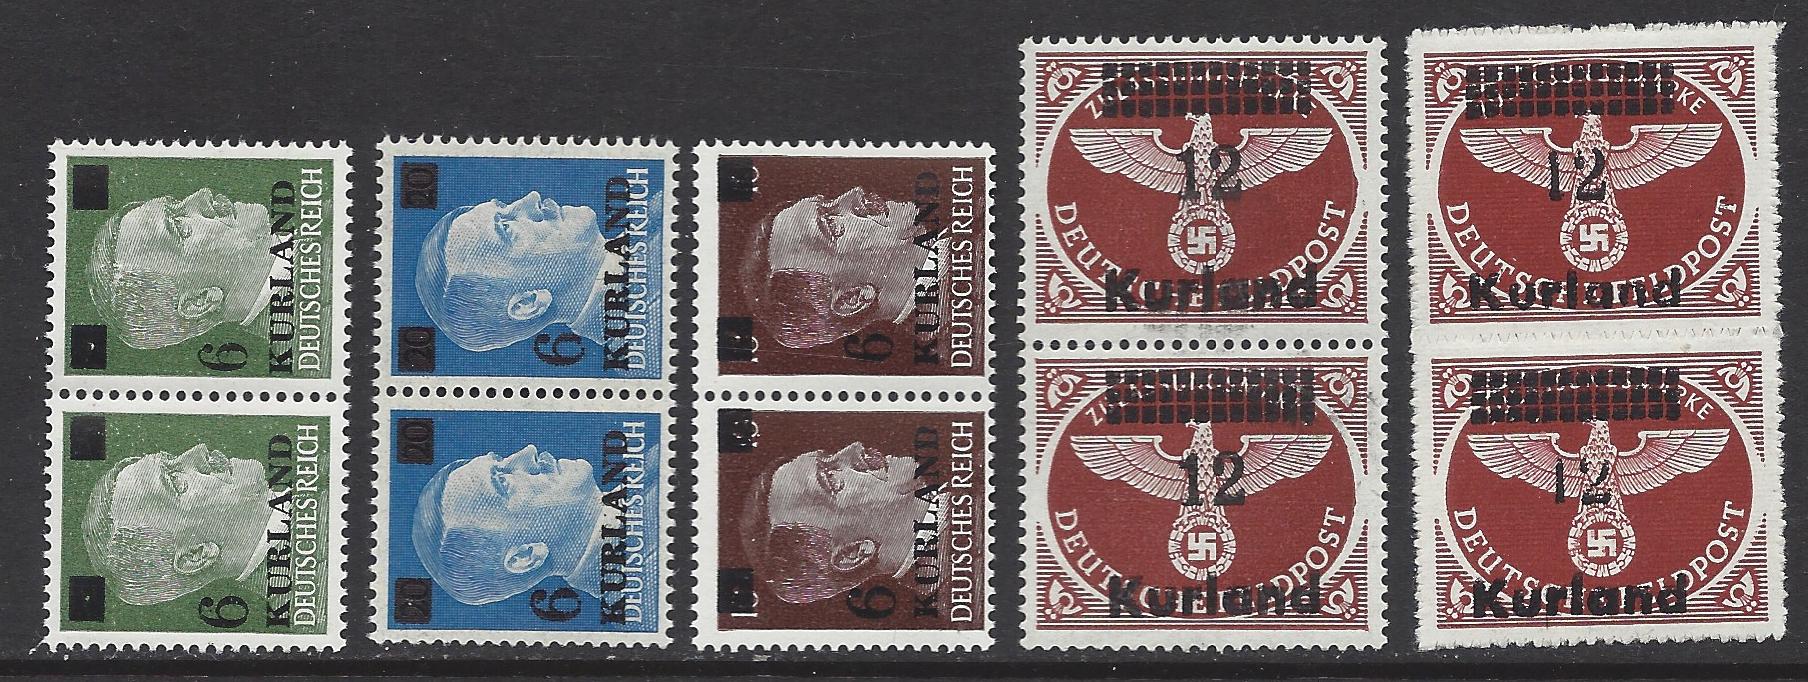 Baltic States Specialized German Occupation Scott 1N20-4 